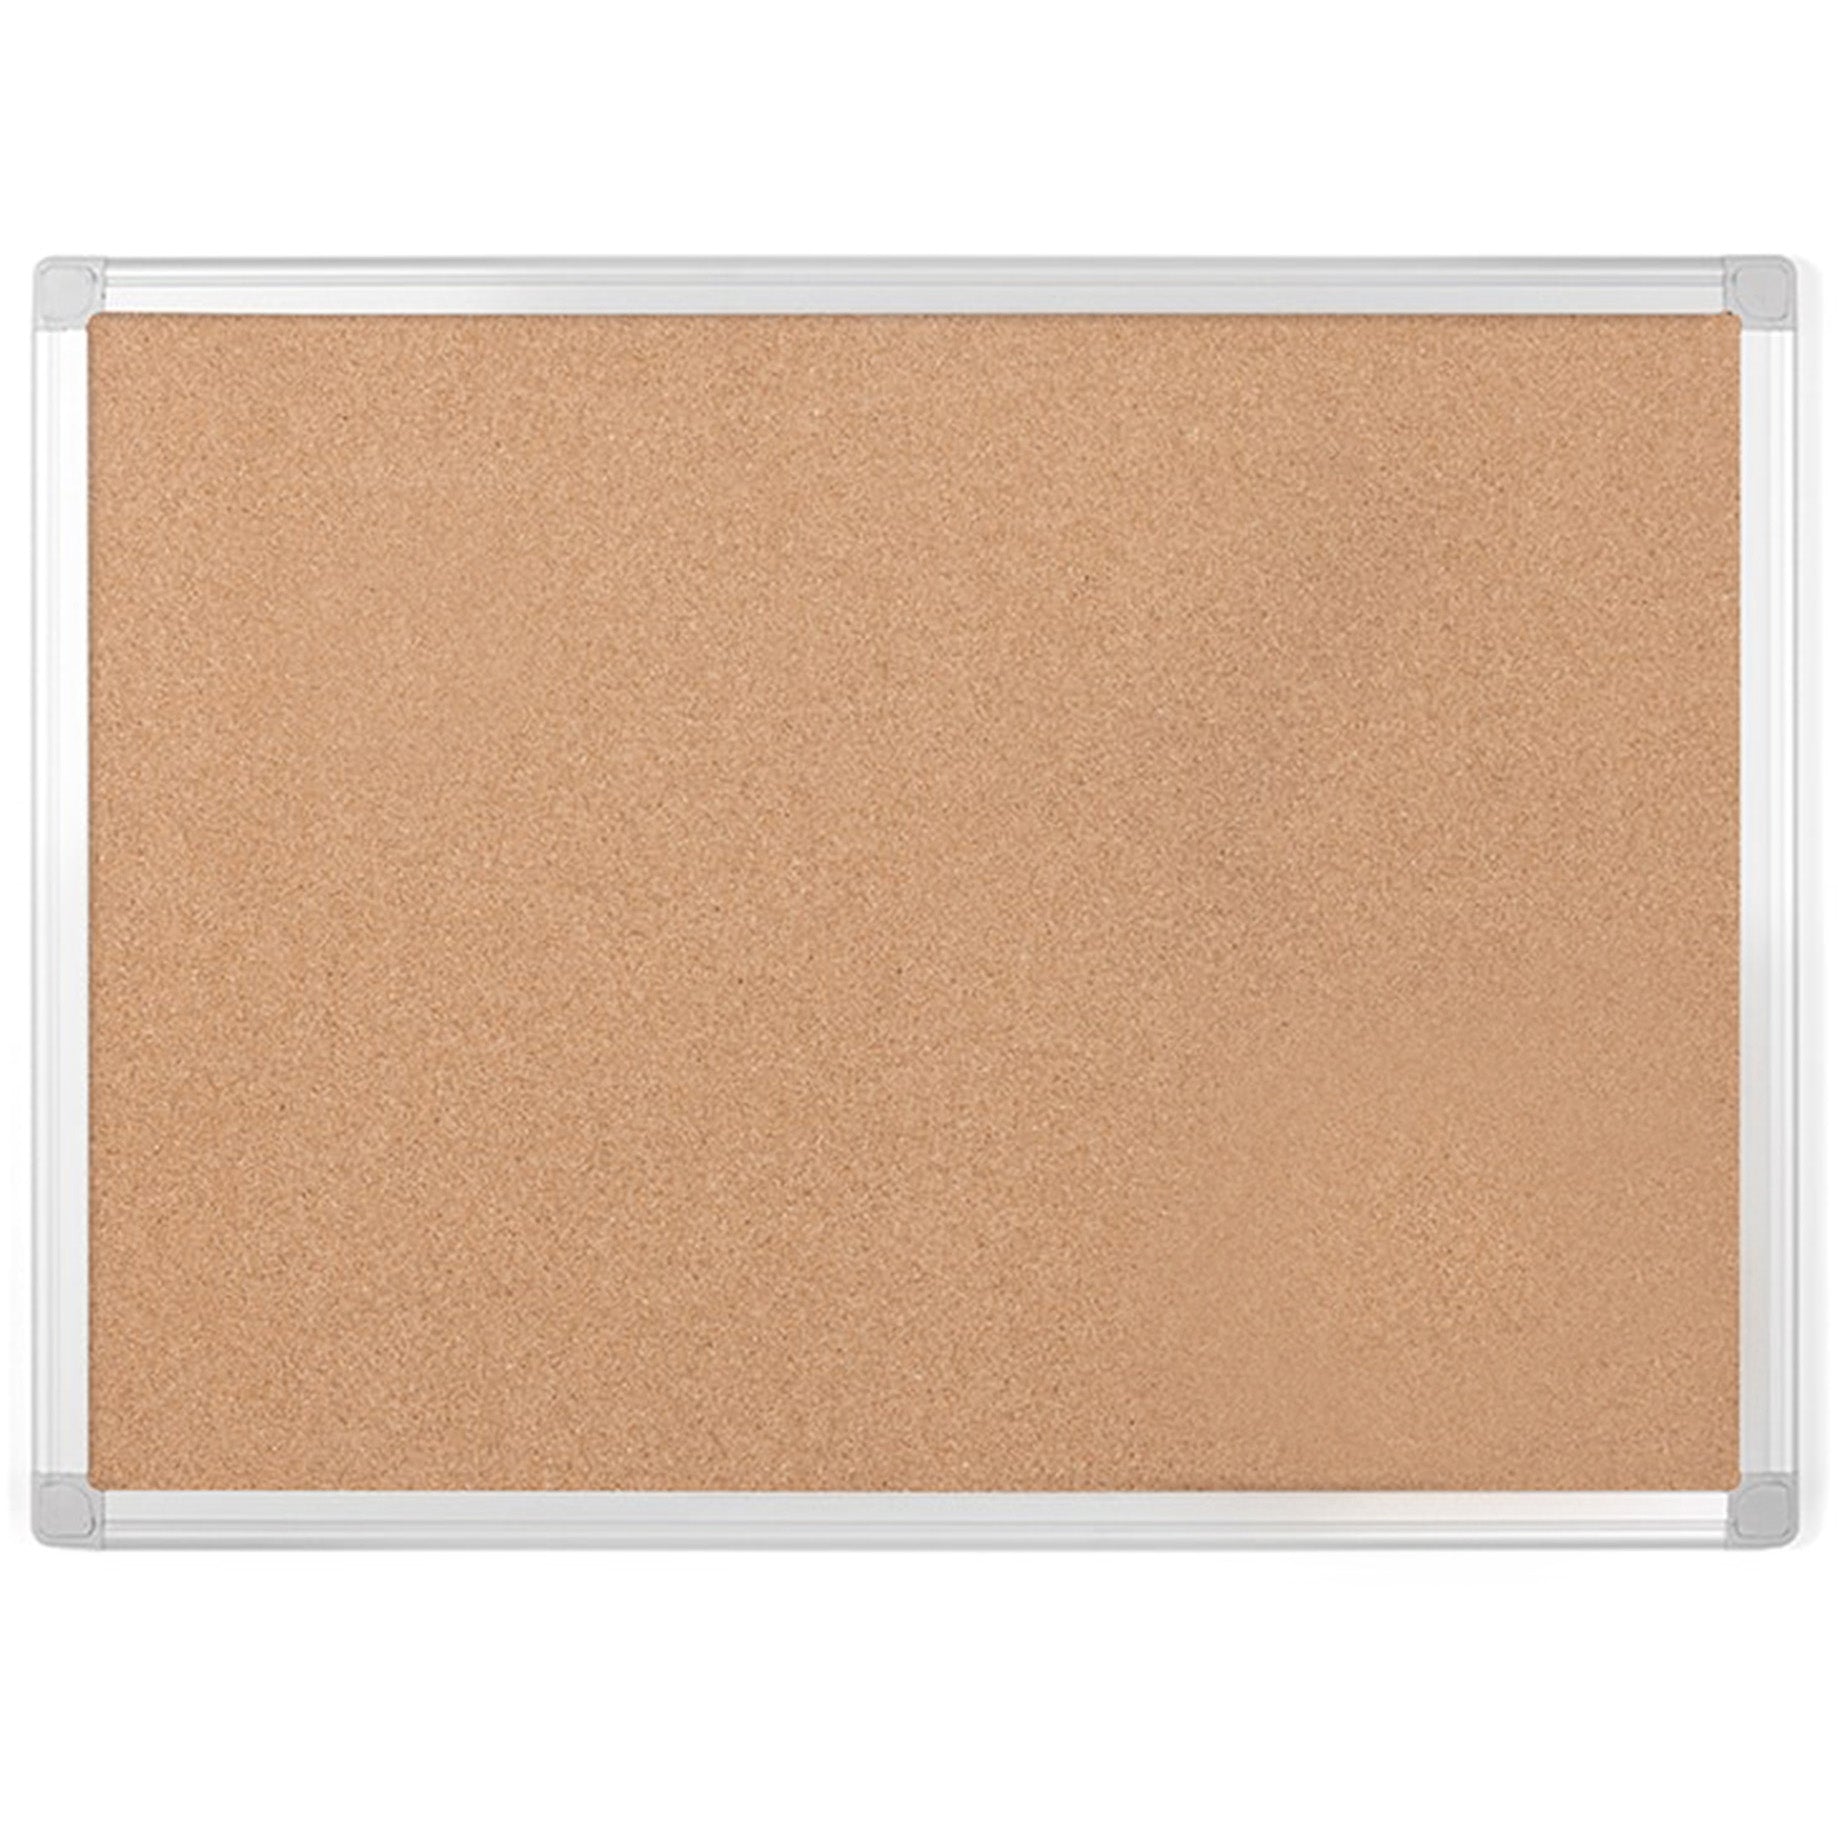 CA271790 Earth Series Self-Healing Cork Bulletin Board, Wall Mounting 100% Recycled Cork Push Pin Board , 48" x 72", Aluminum Frame by MasterVision